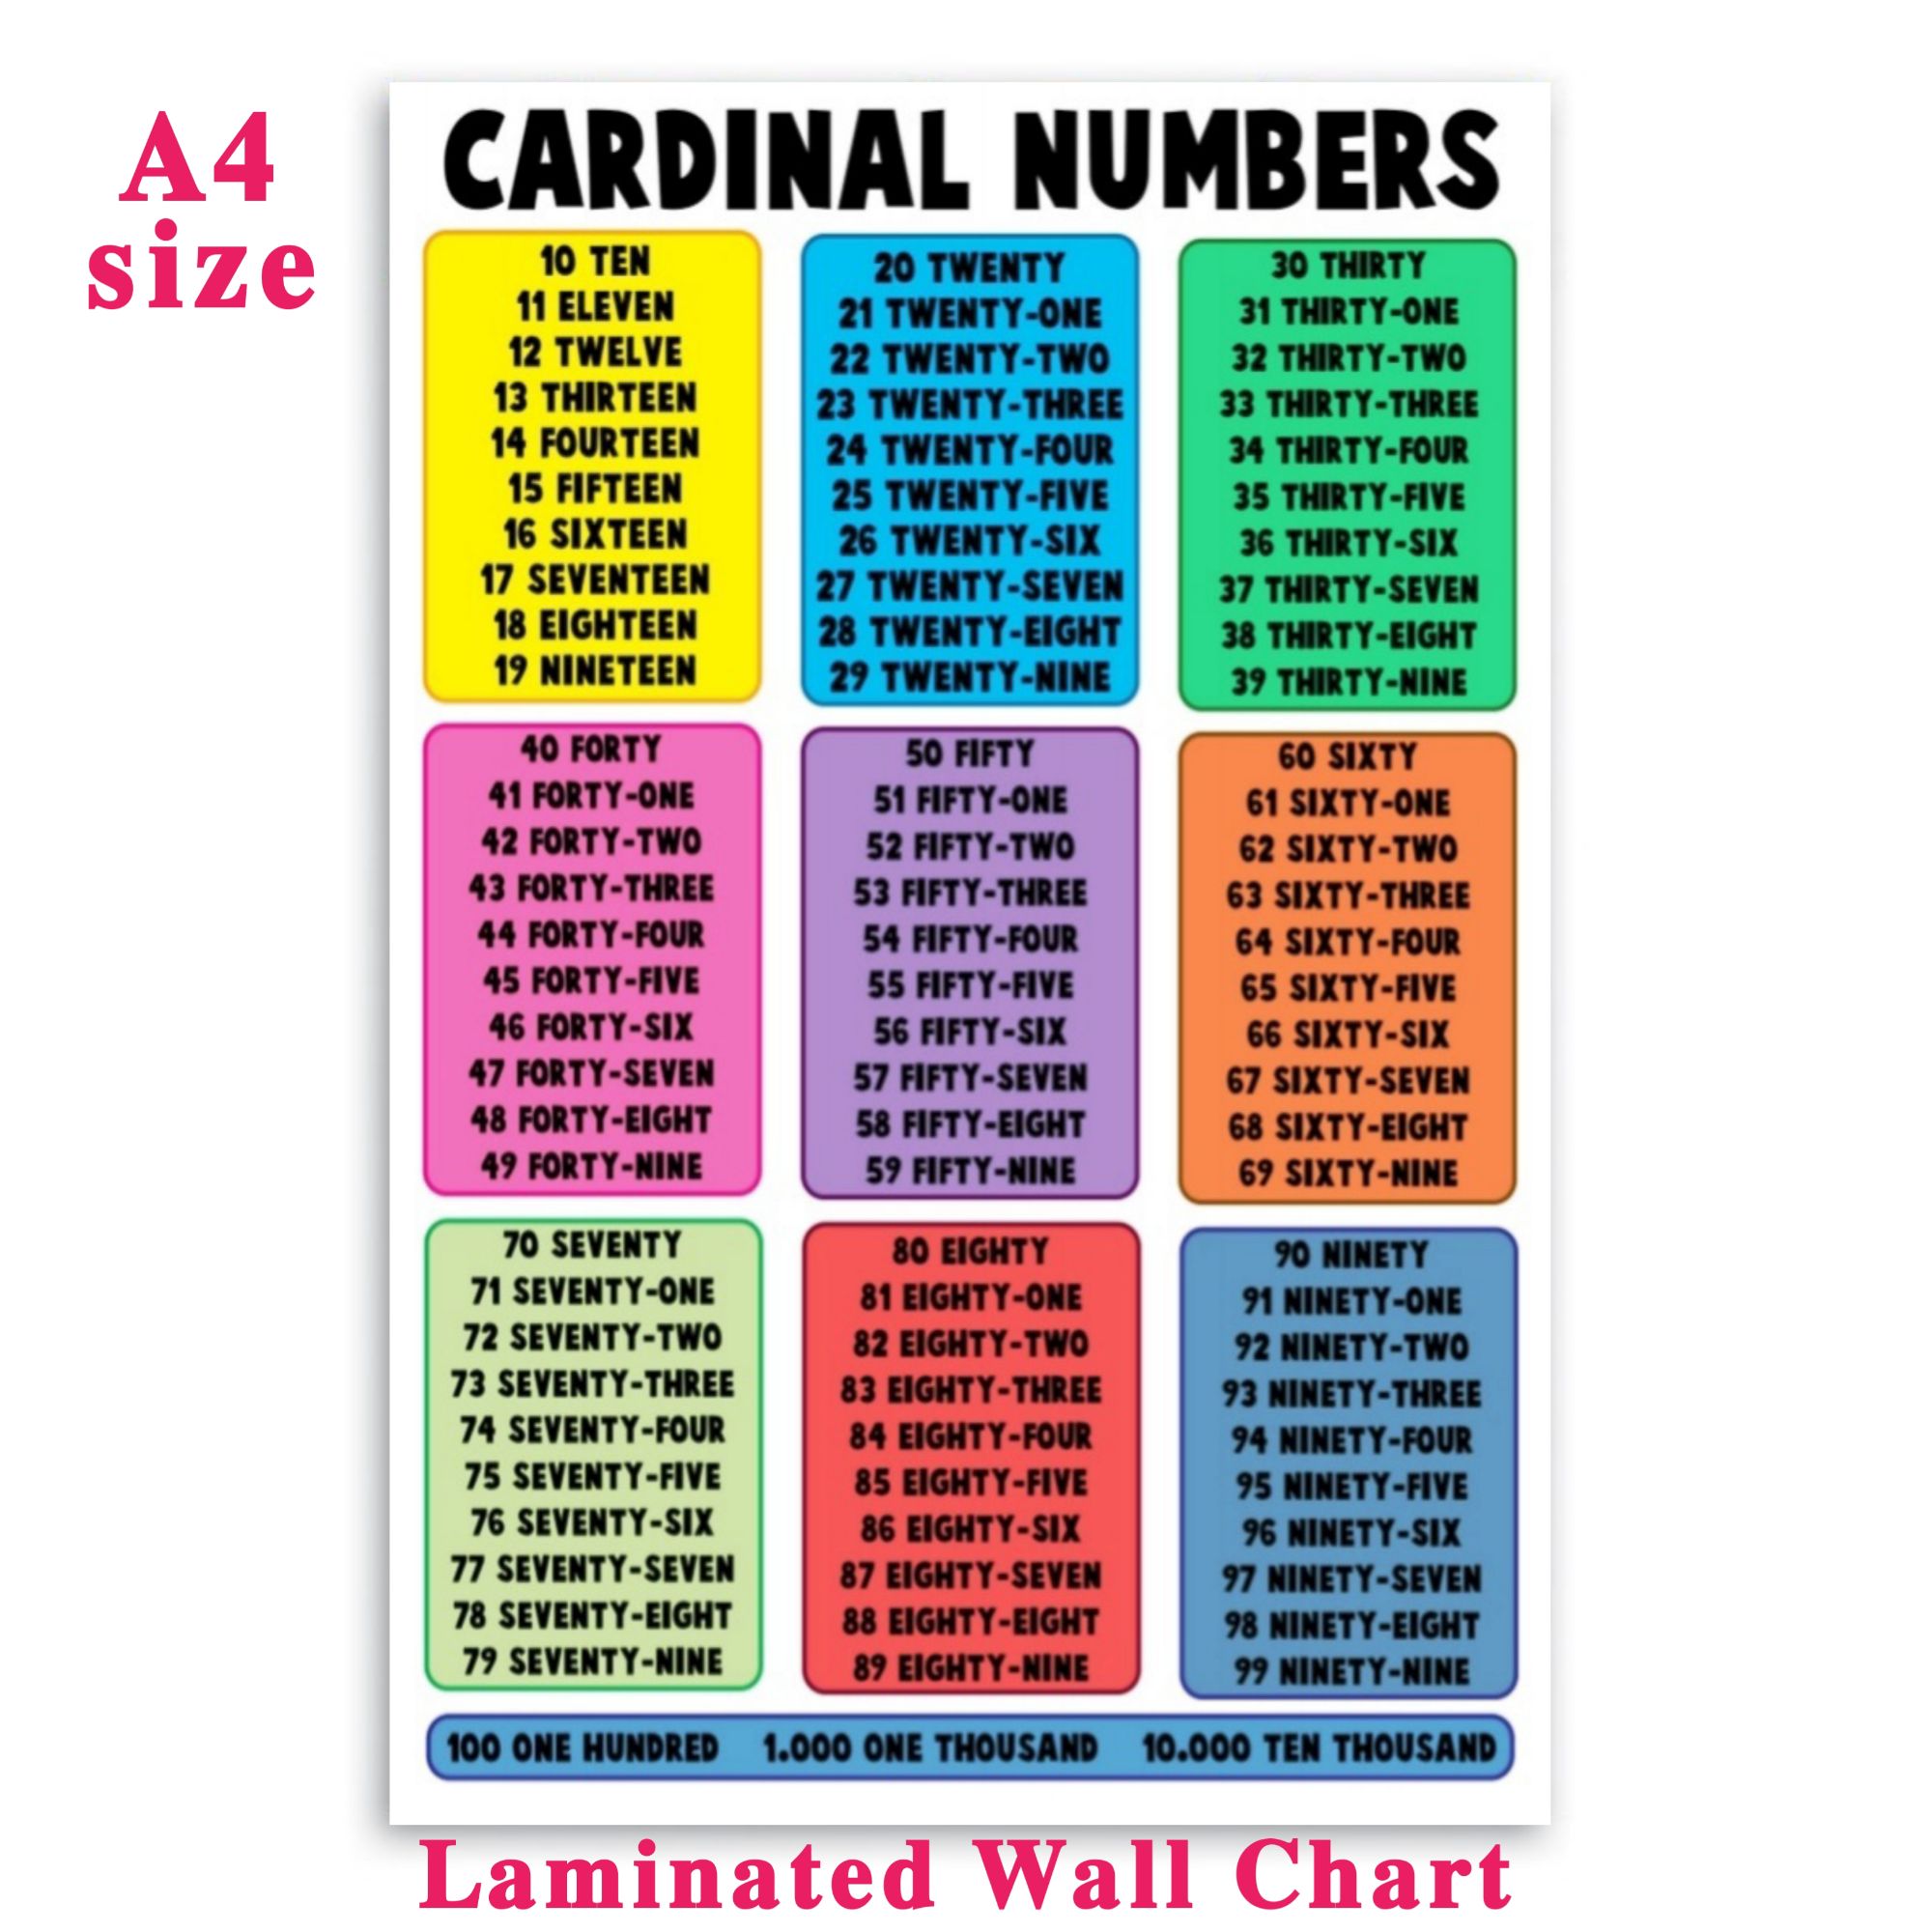 cardinal-ordinal-numbers-a4-size-laminated-educational-preschool-poster-kids-learning